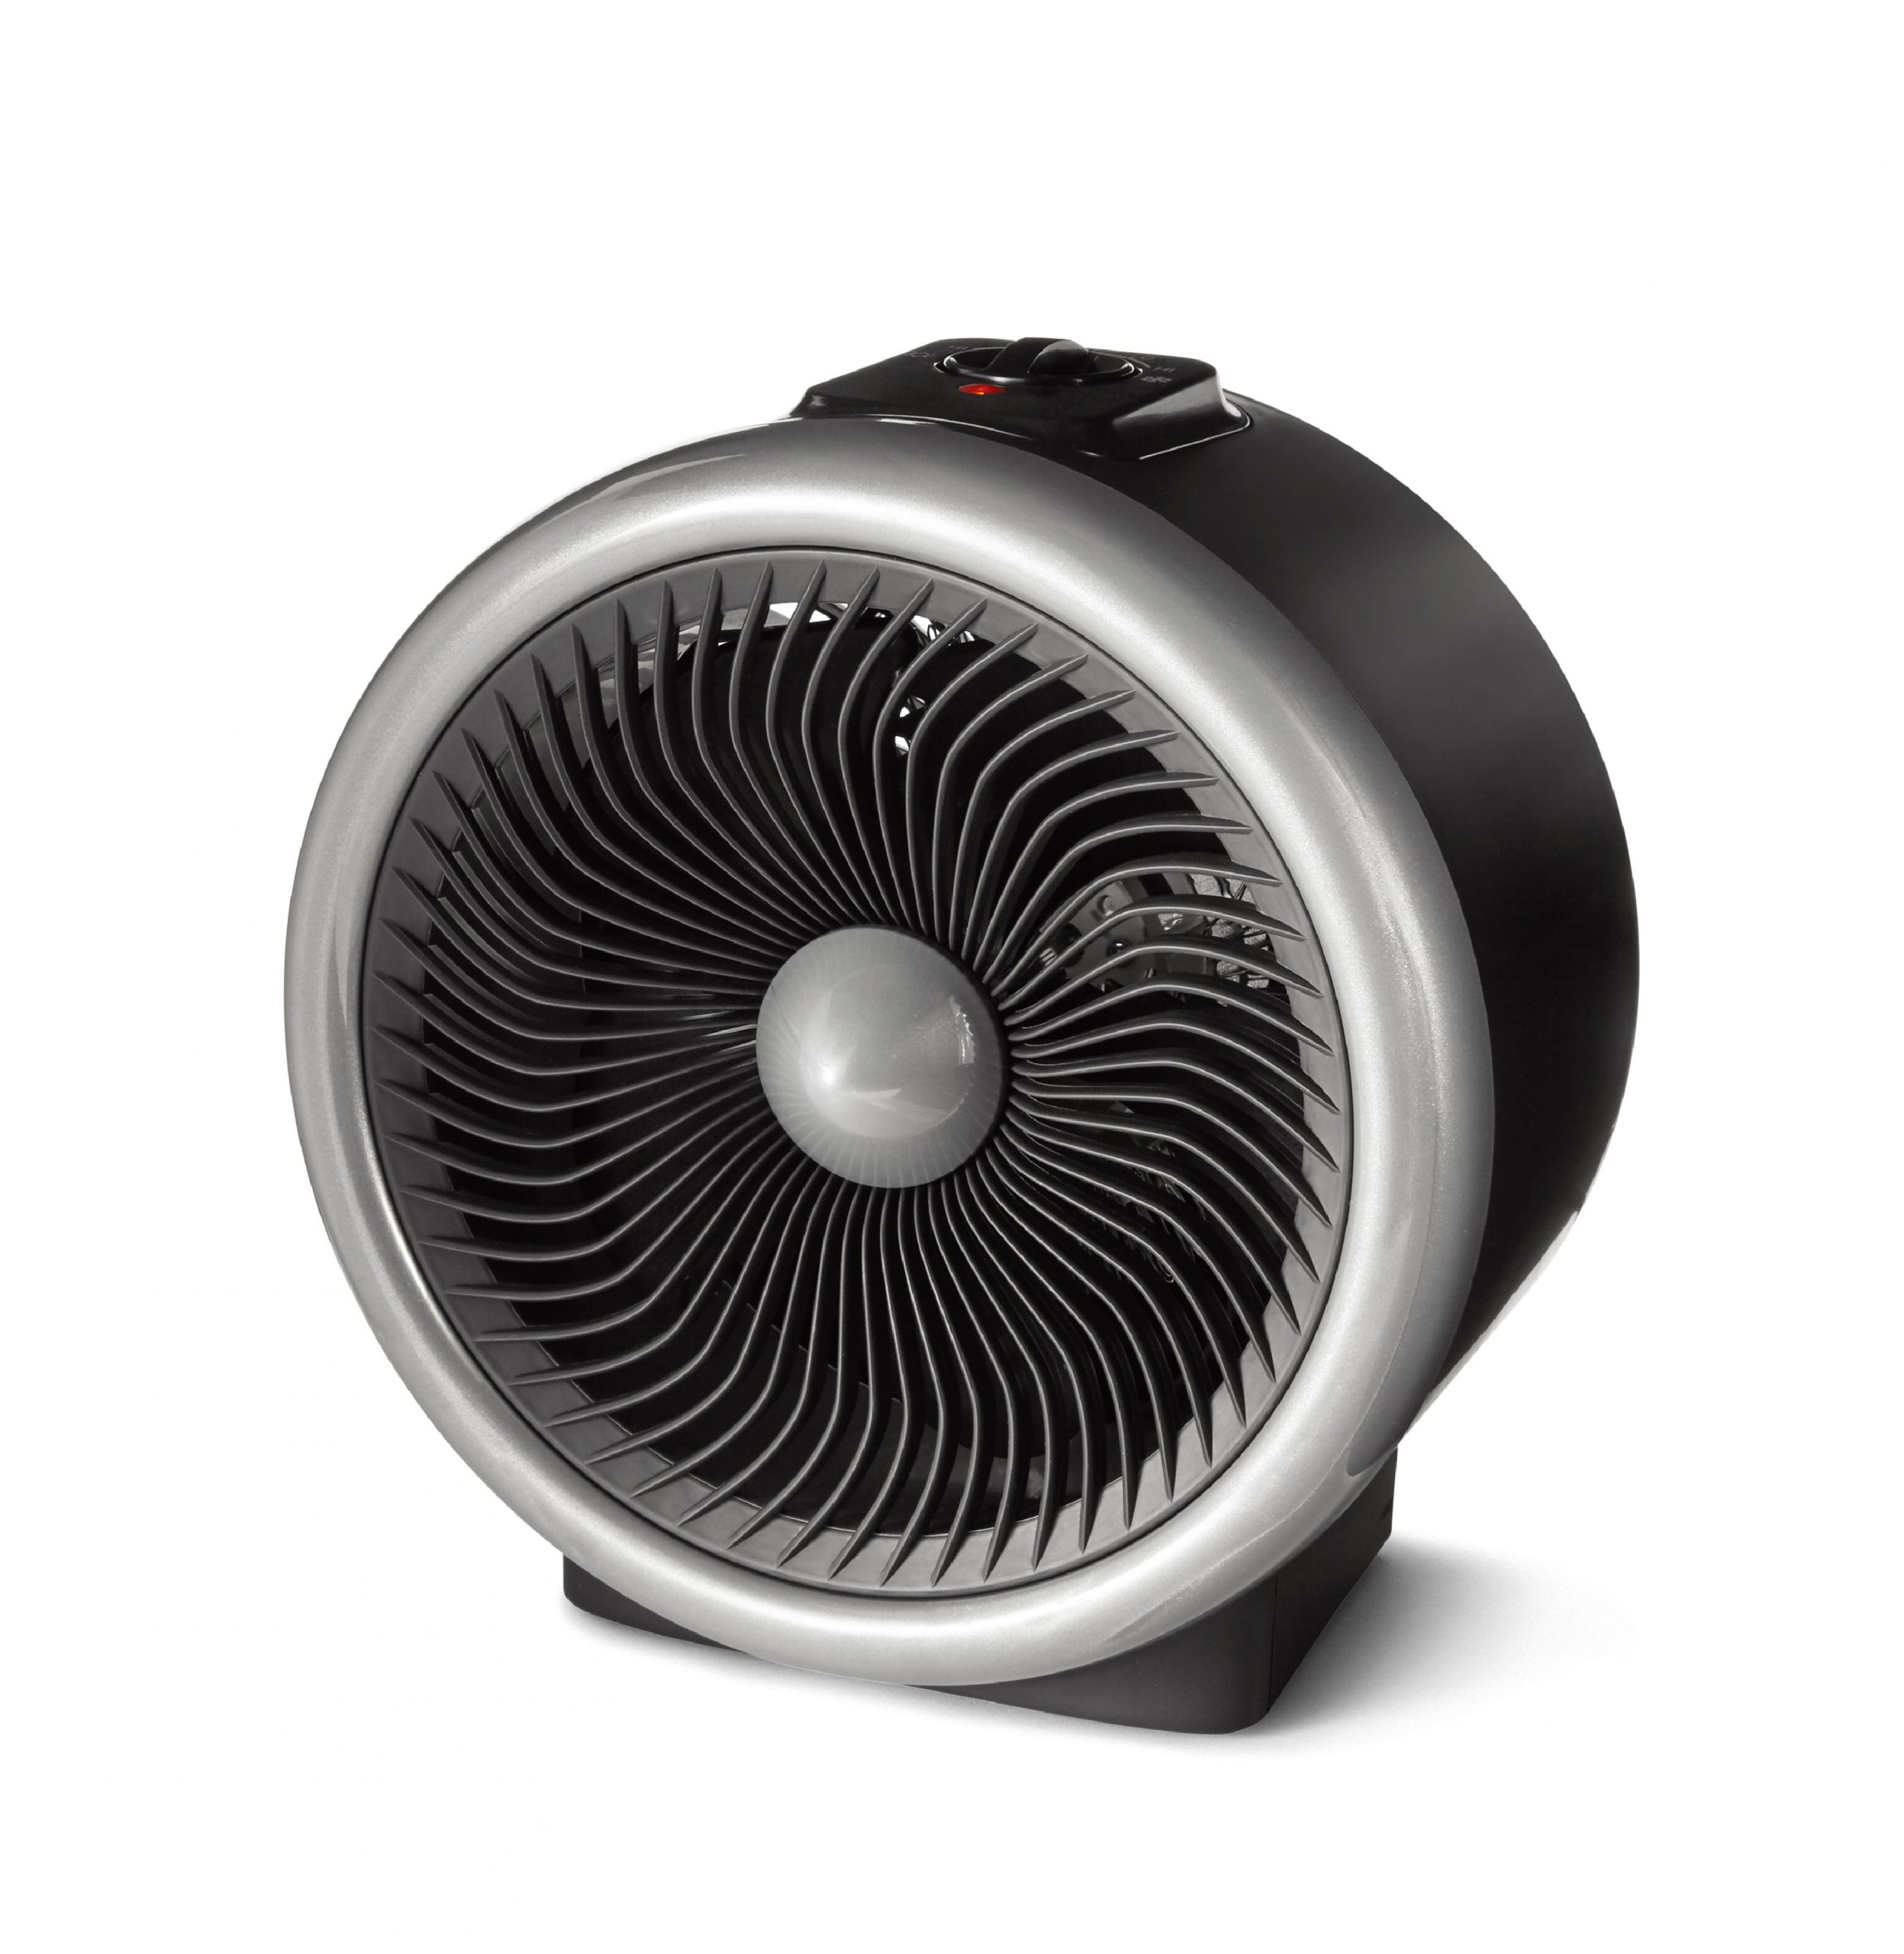 Mainstays 2 In 1 Portable Heater Fan 900 1500w Indoor Black Walmart pertaining to proportions 3164 X 3247